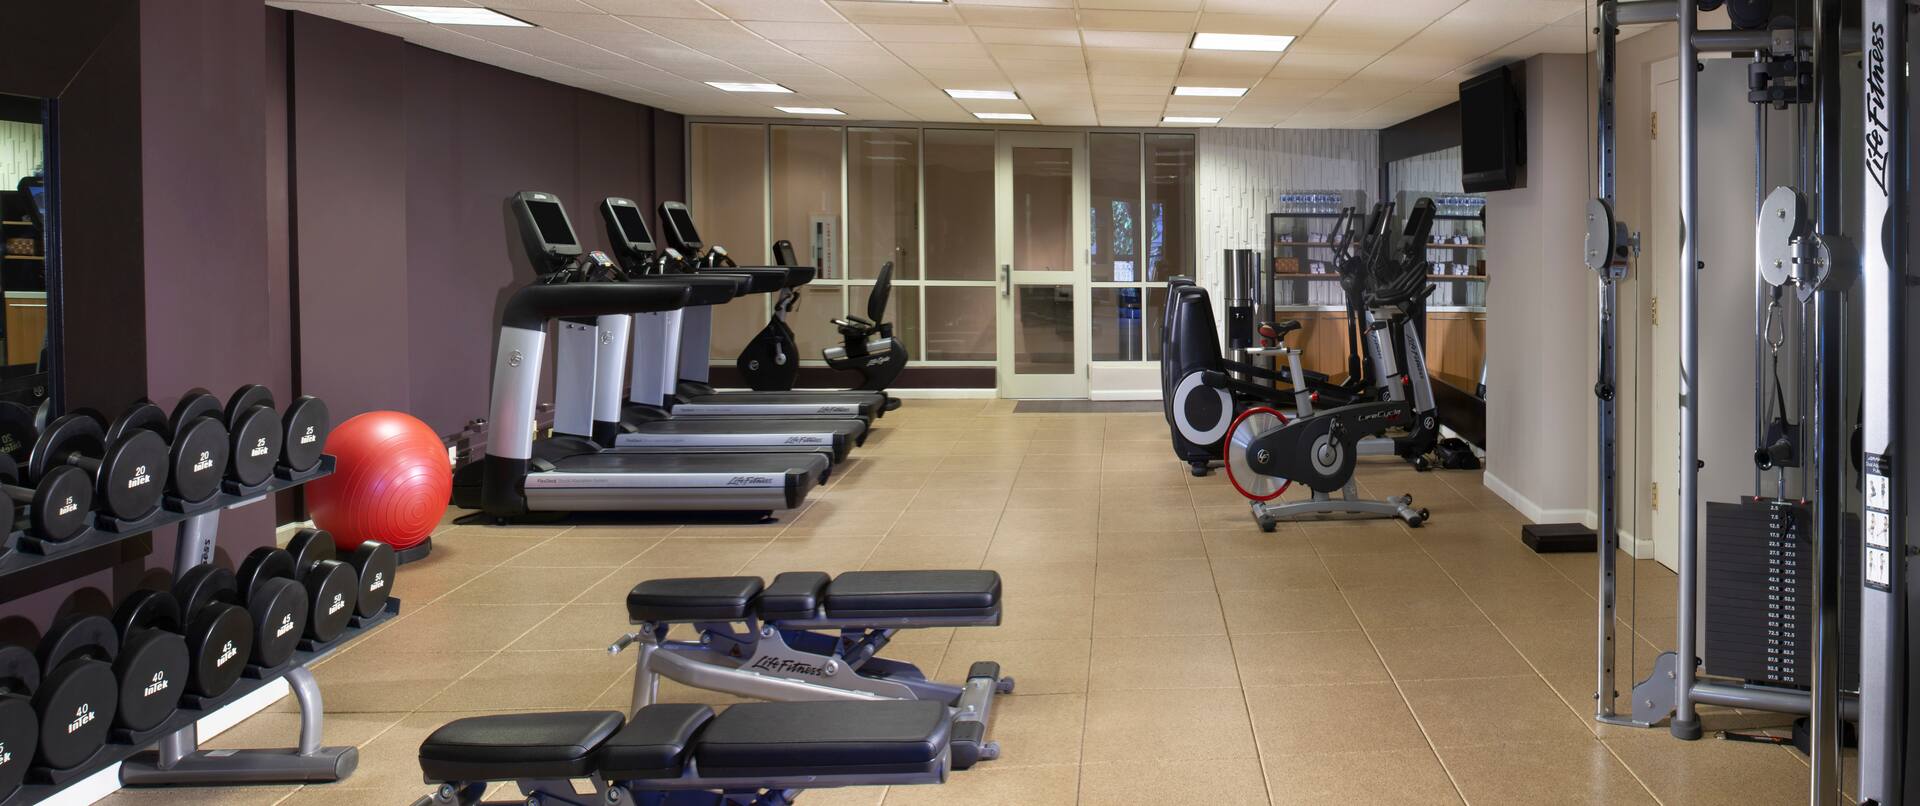 Fitness Center with weights and running machines